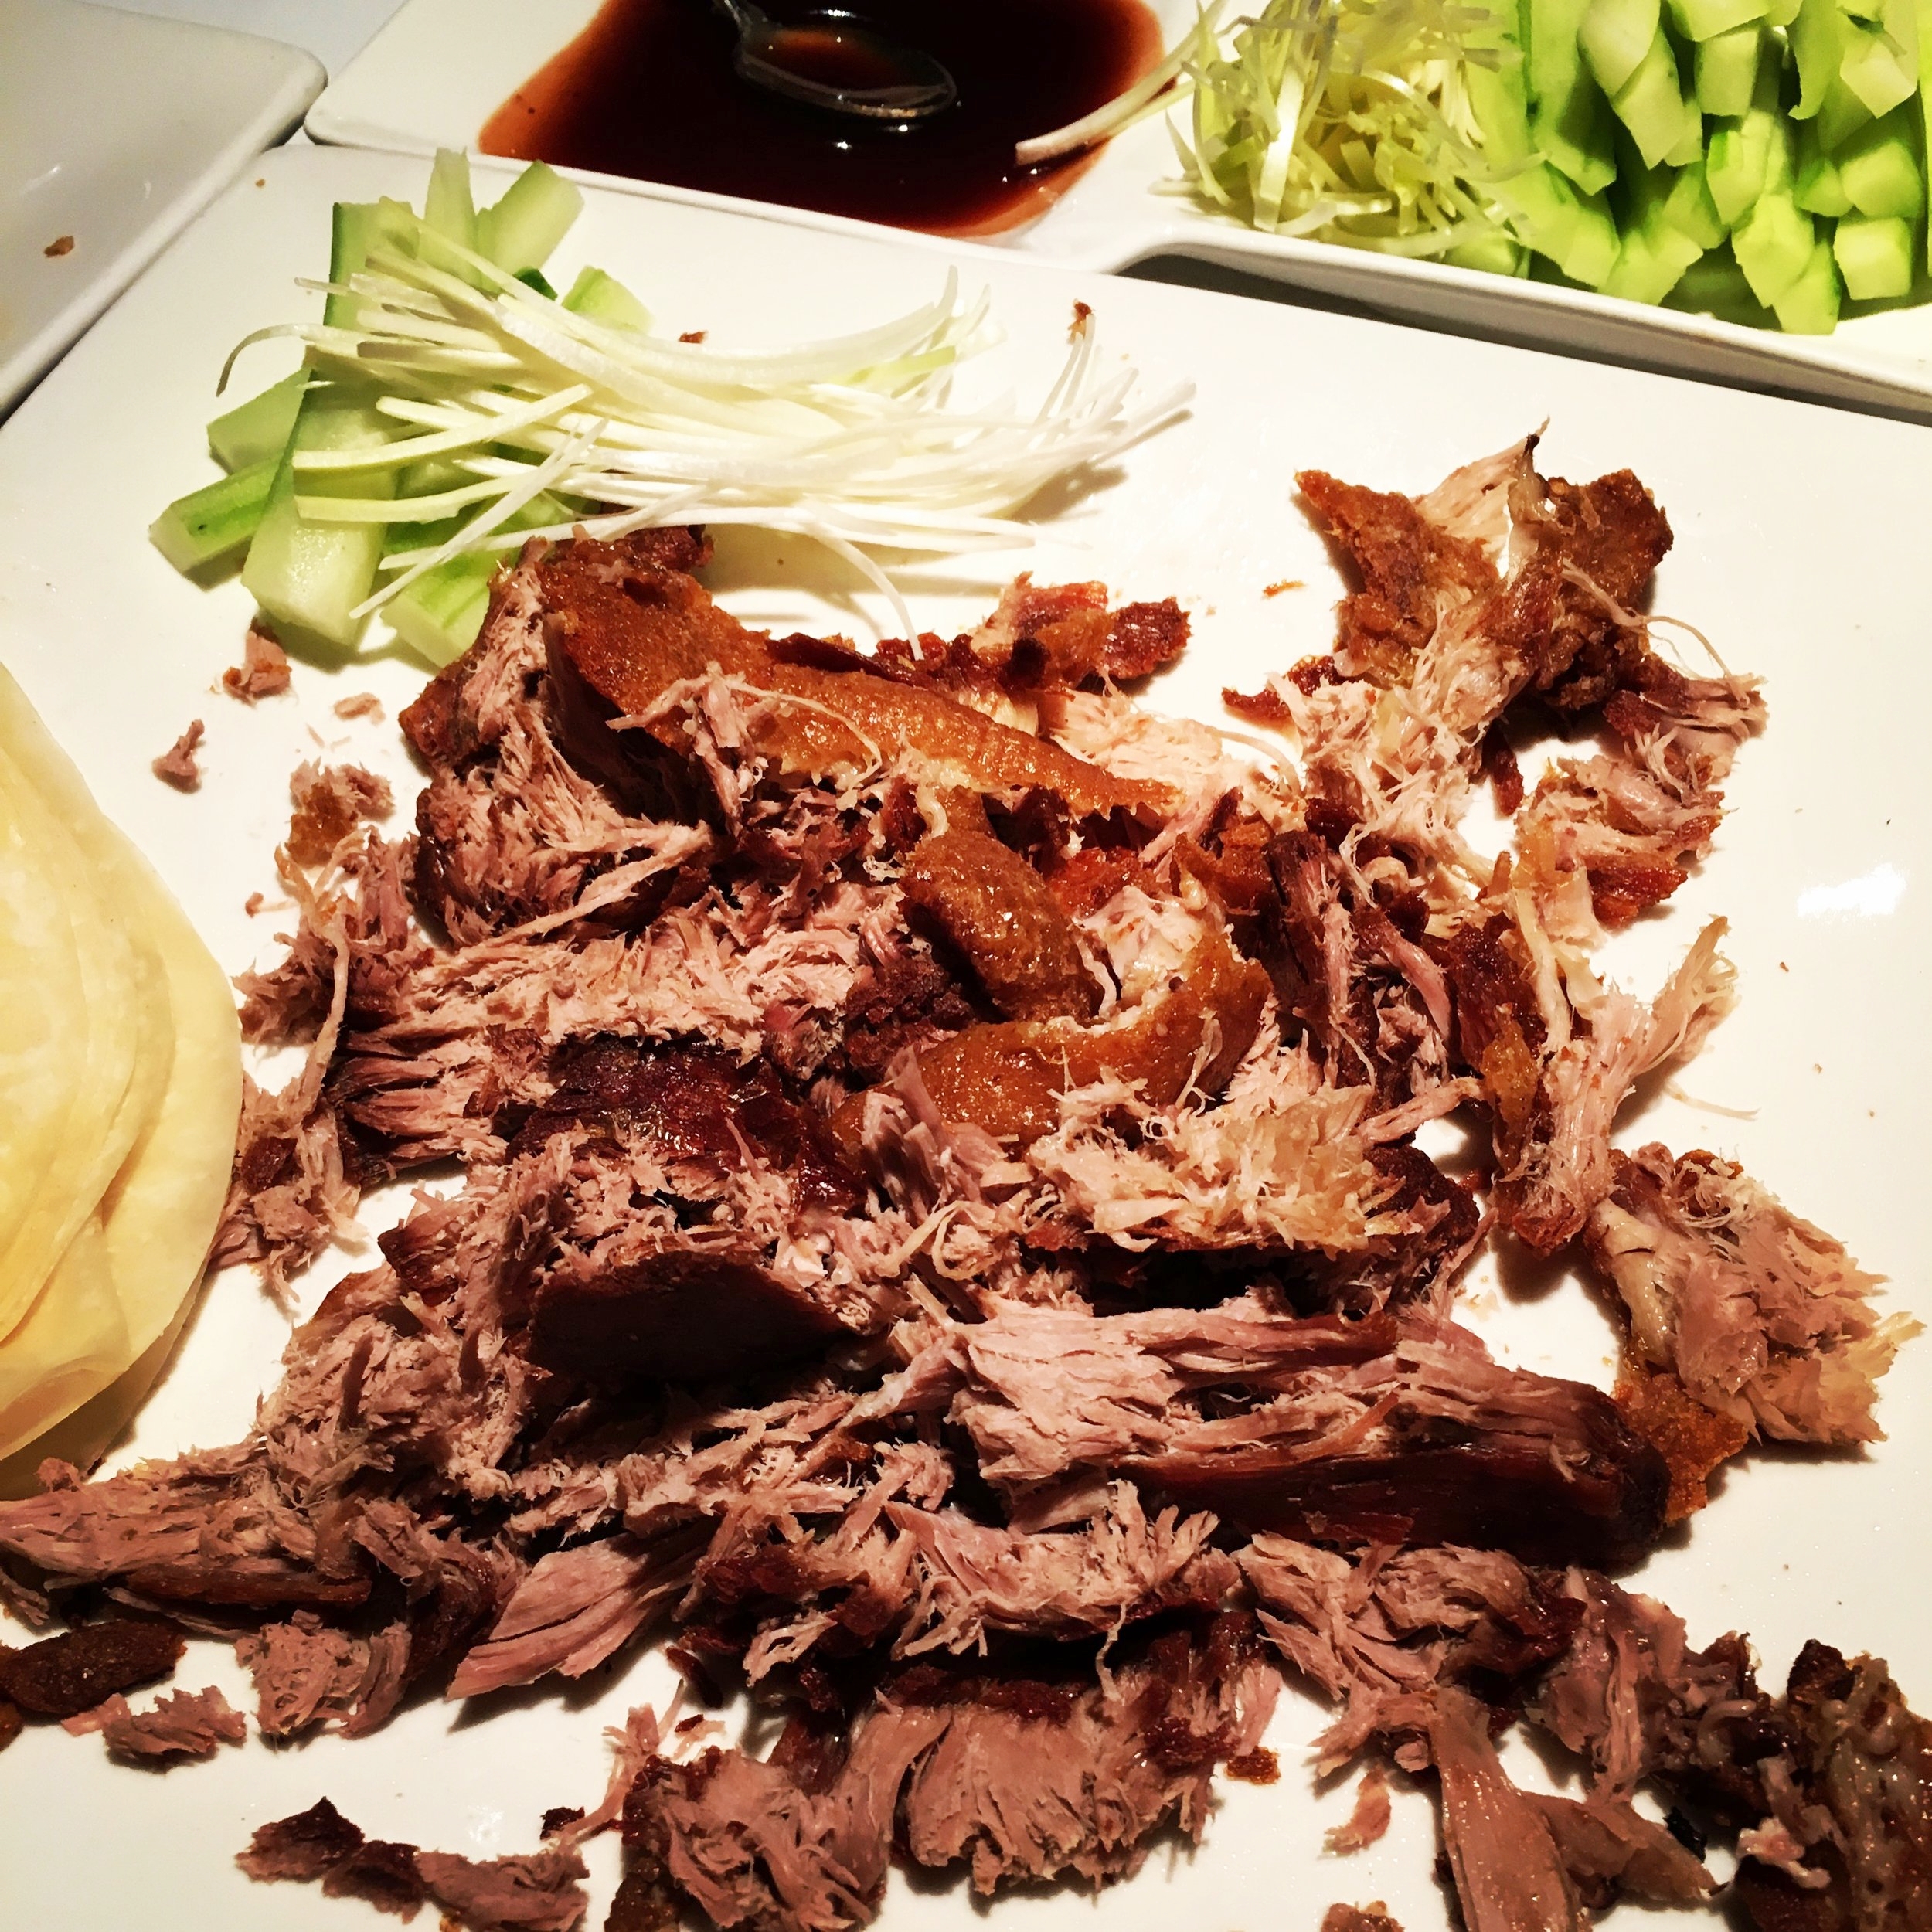 Crispy duck with pancakes, plum sauce and other condiments